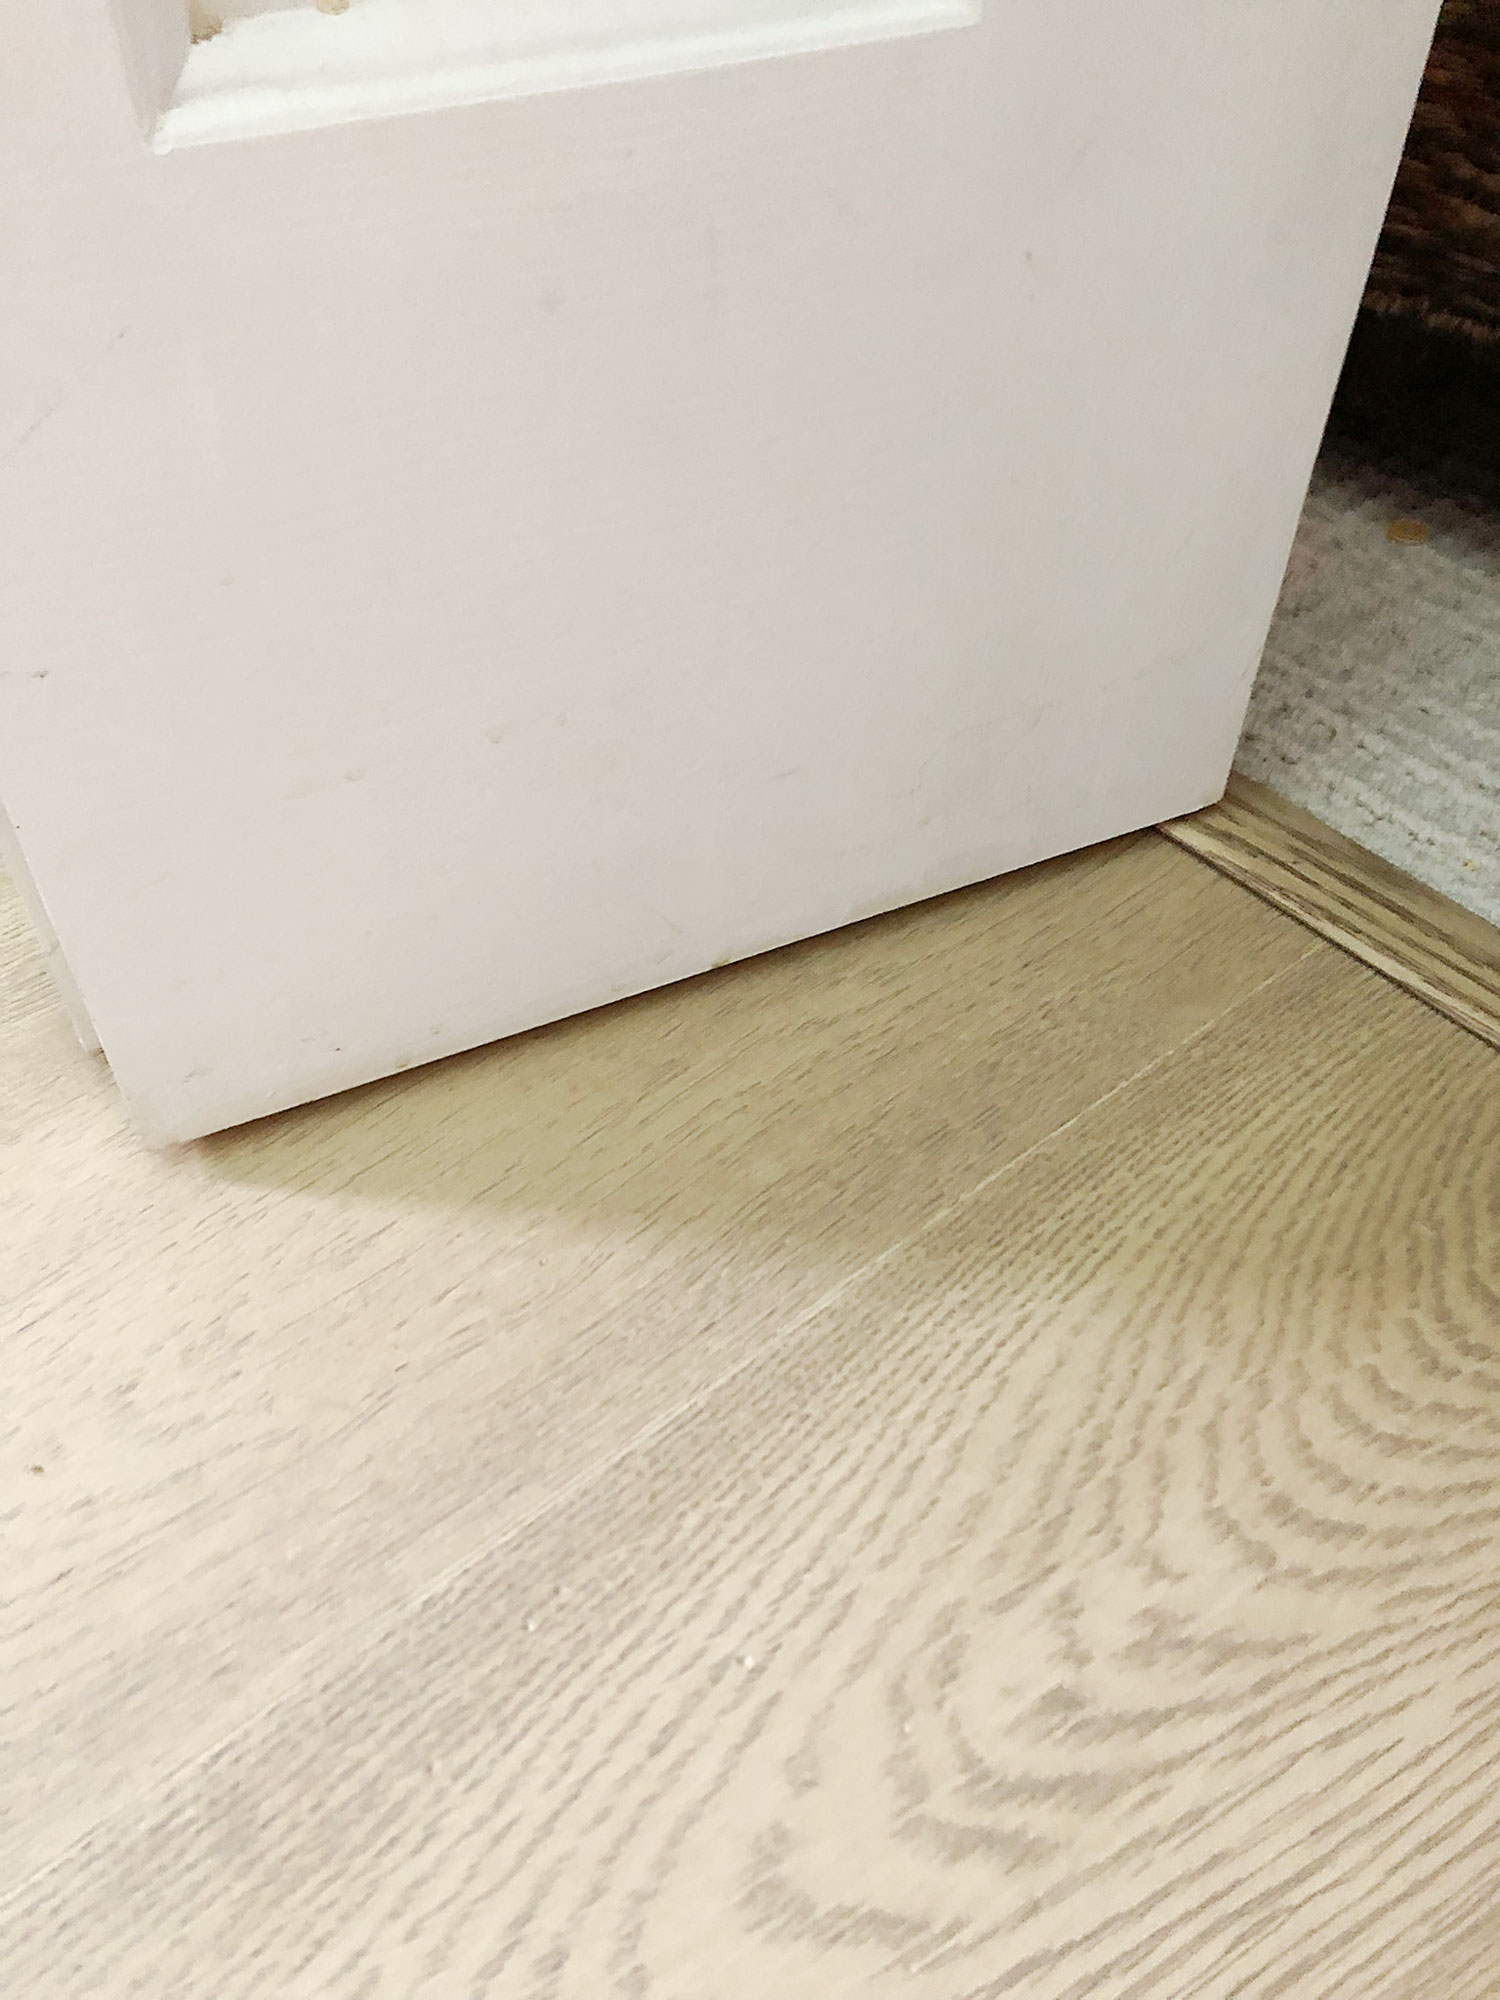 How to Install Floating Vinyl Flooring Over Old Floors – Simply2moms